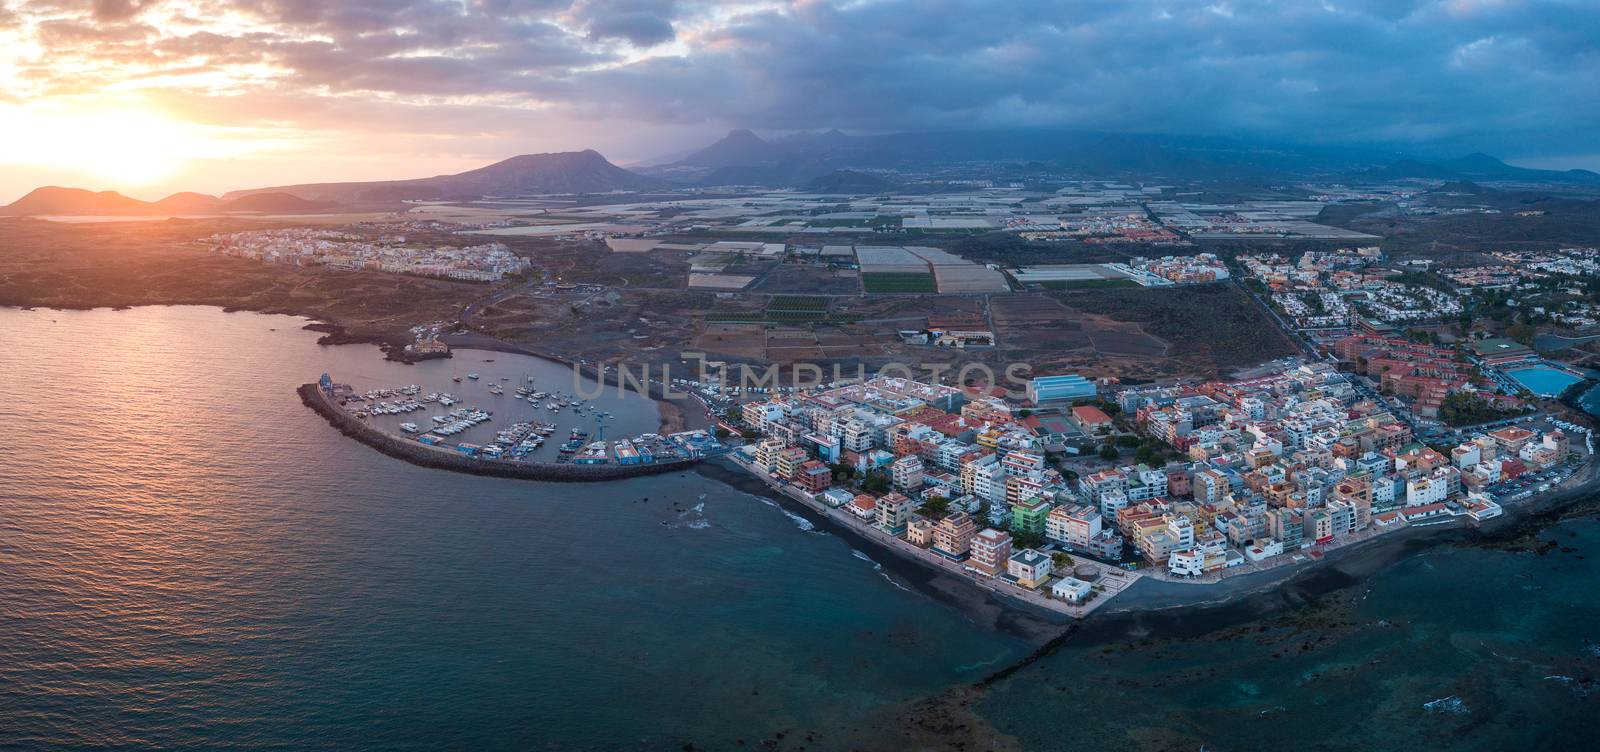 Aerial view of the city on the Atlantic coast. Tenerife, Canary Islands, Spain